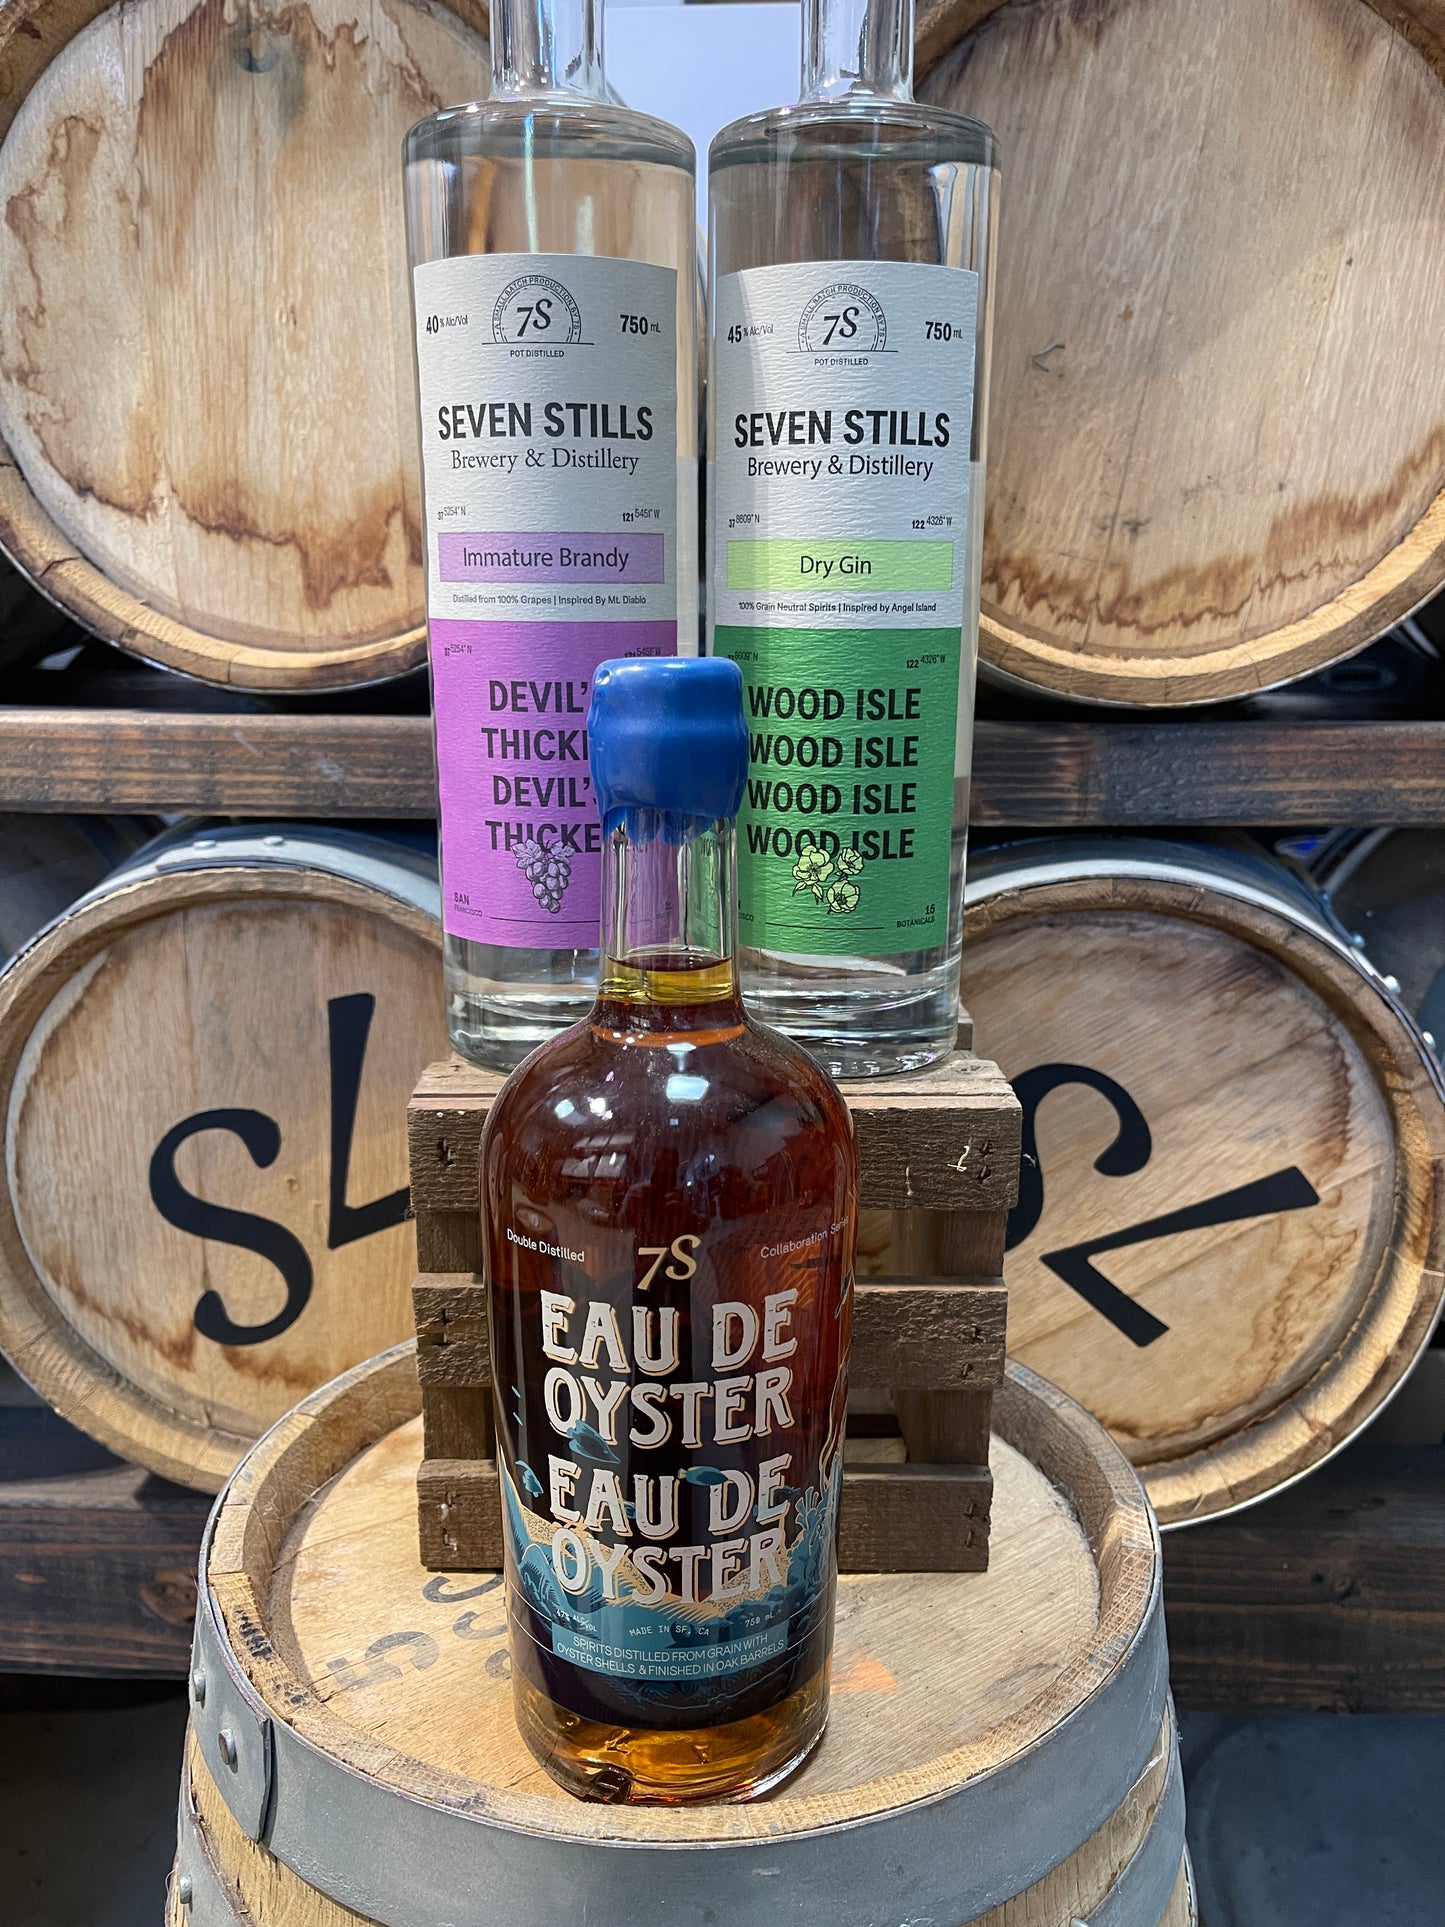 Variety Pack Large - Devil's Thicket Pisco, Wood Isle Gin, Eau De Oyster Whiskey